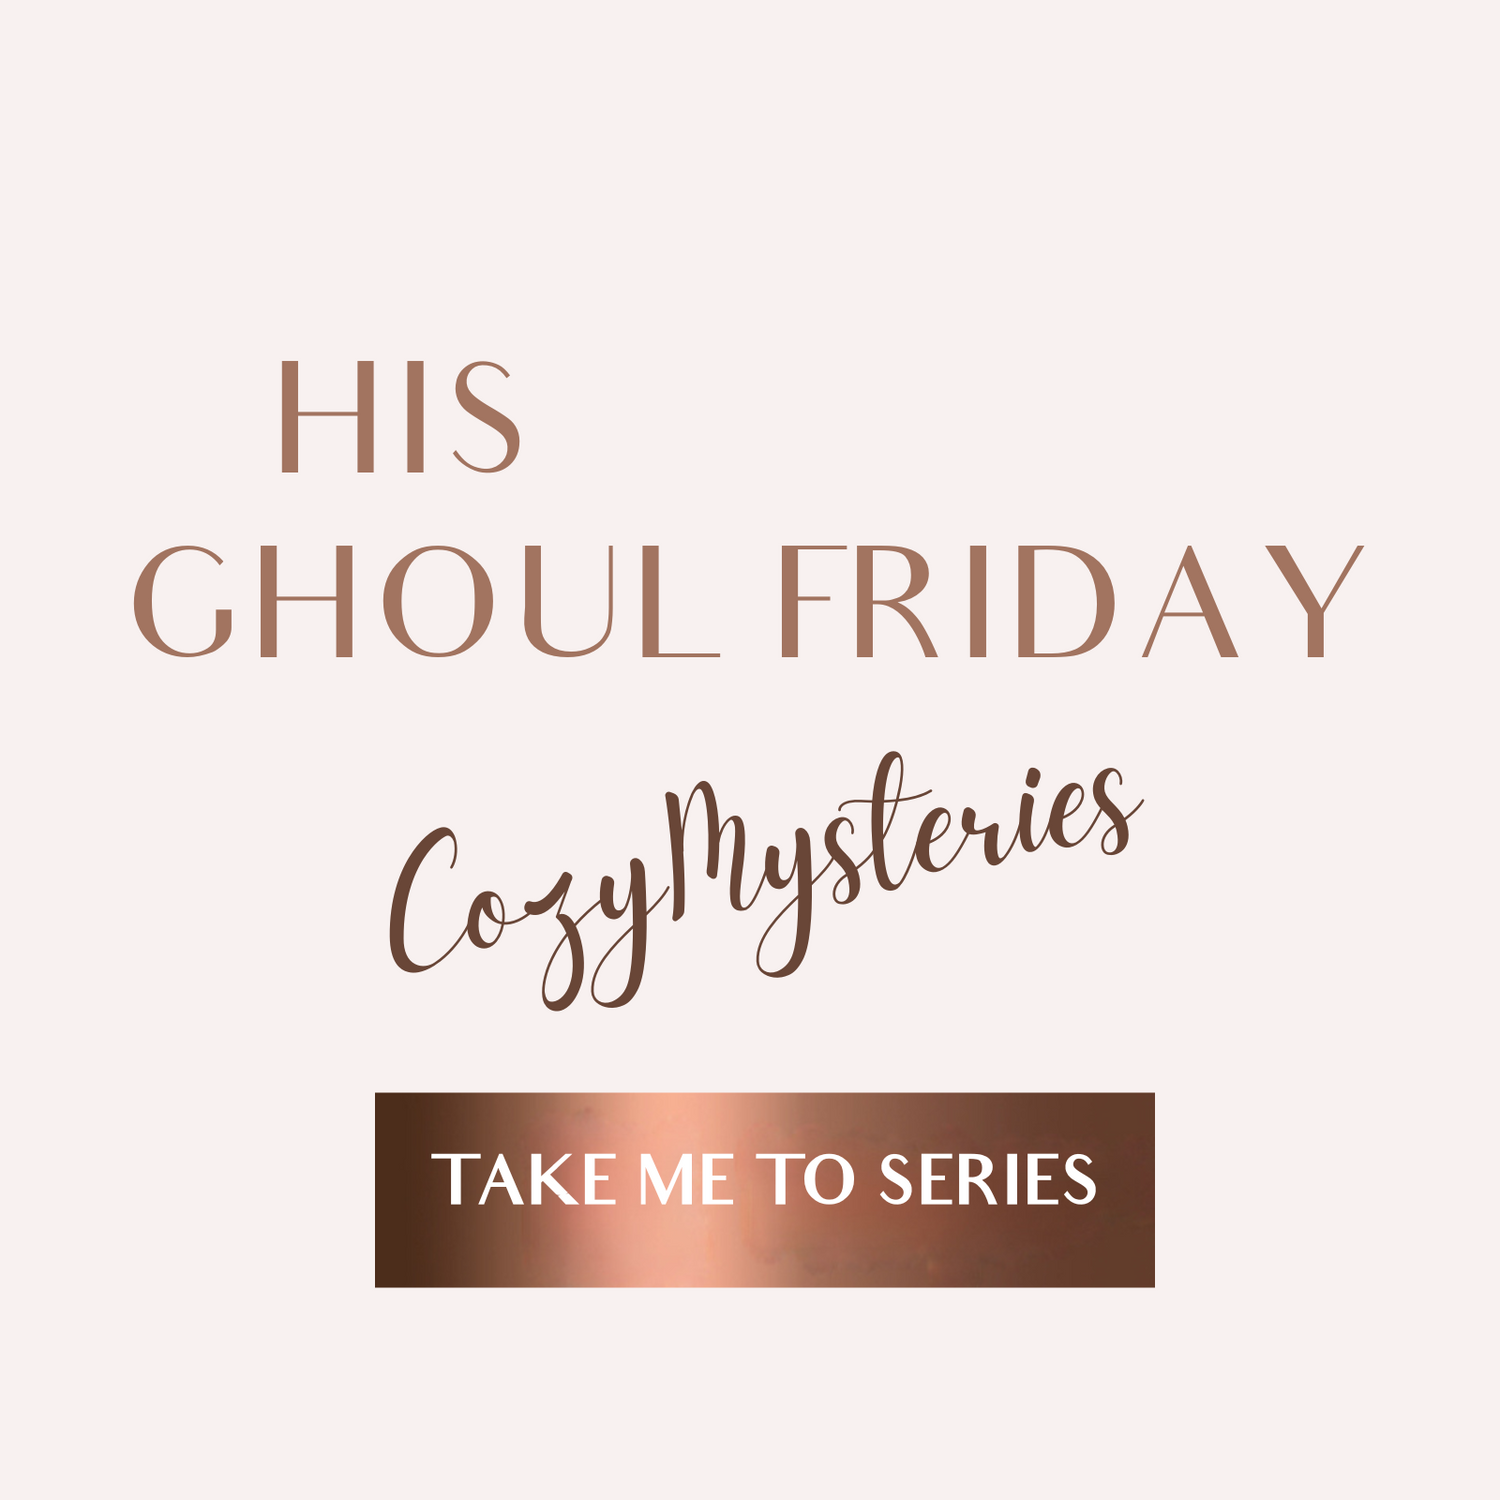 His Ghoul Friday Series EBOOKS